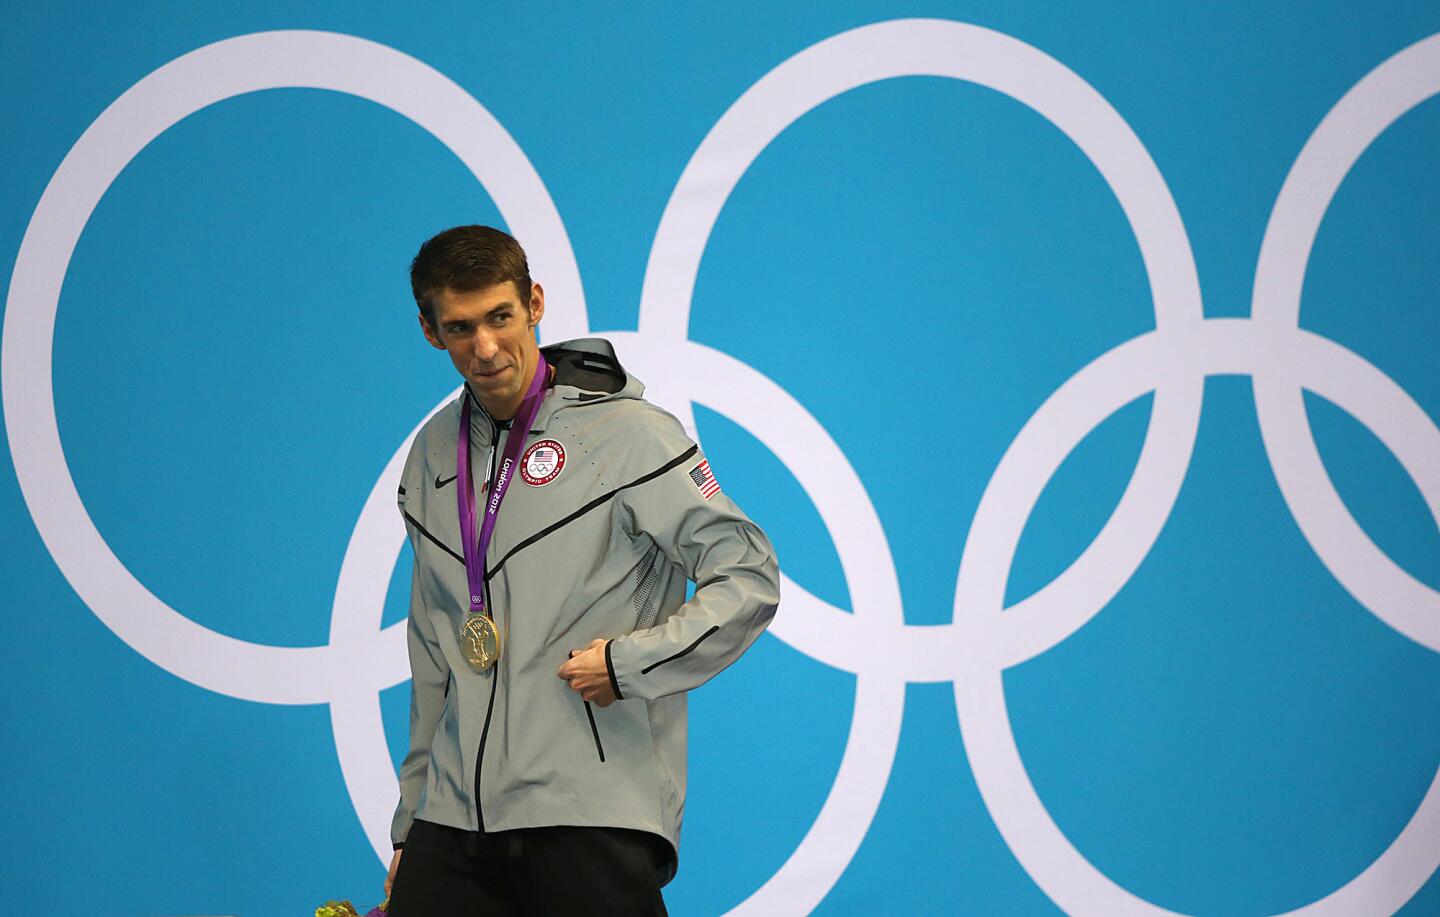 Michael Phelps leaves the podium with his 17th career Olympic gold medal after winning the men's 100m butterfly.